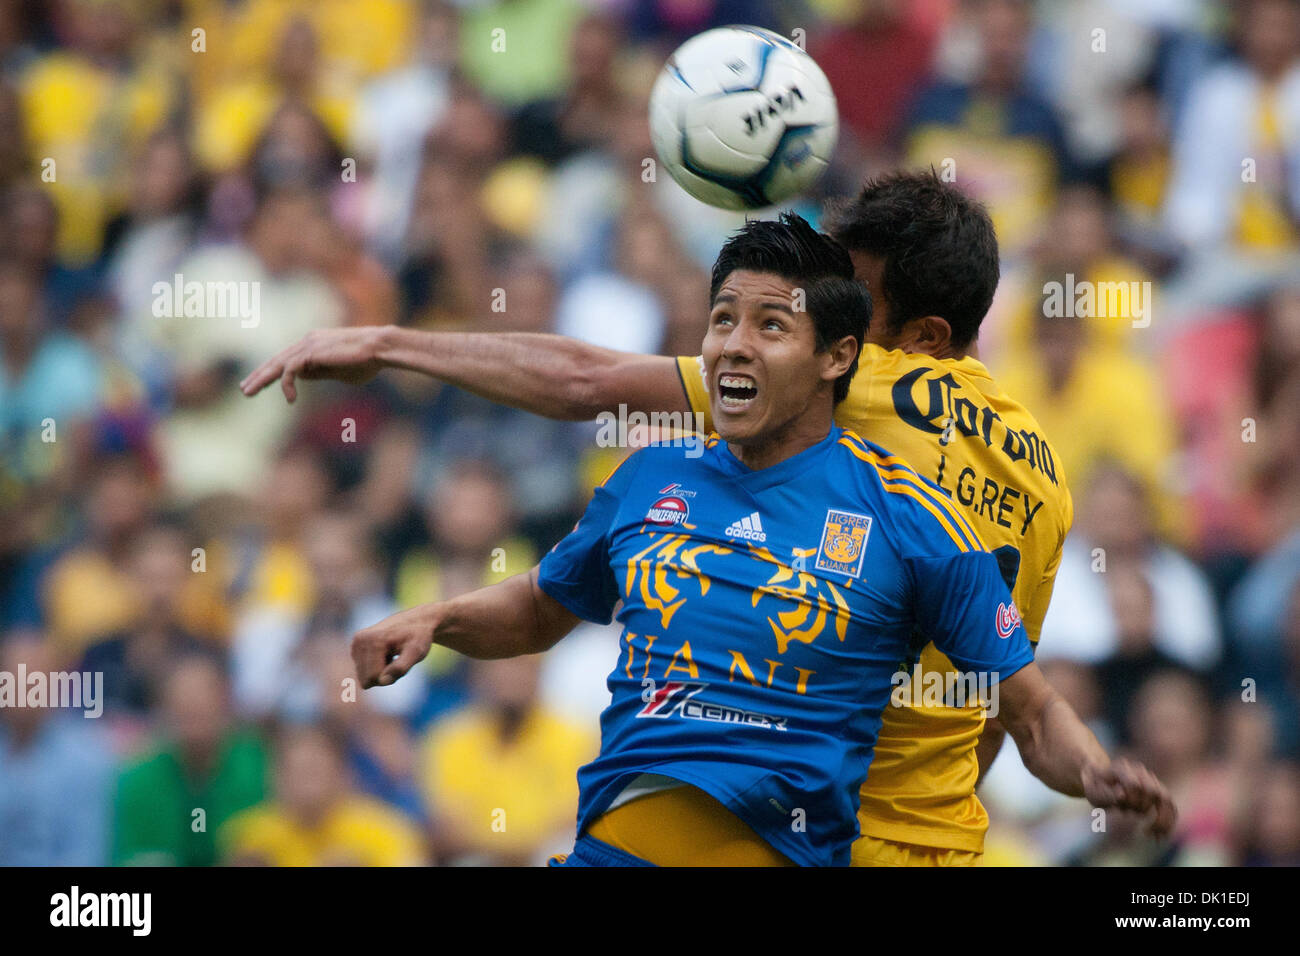 Mexico City, Mexico. 1st December 2013. America's Luis Gabriel Rey (BACK) vies for the ball with Hugo Ayala (FRONT) of Tigres during a match of the Liga MX, held in the Azteca Stadium in Mexico City, capital of Mexico, on Dec. 1, 2013. (Xinhua/Pedro Mera/Alamy Live News) Stock Photo